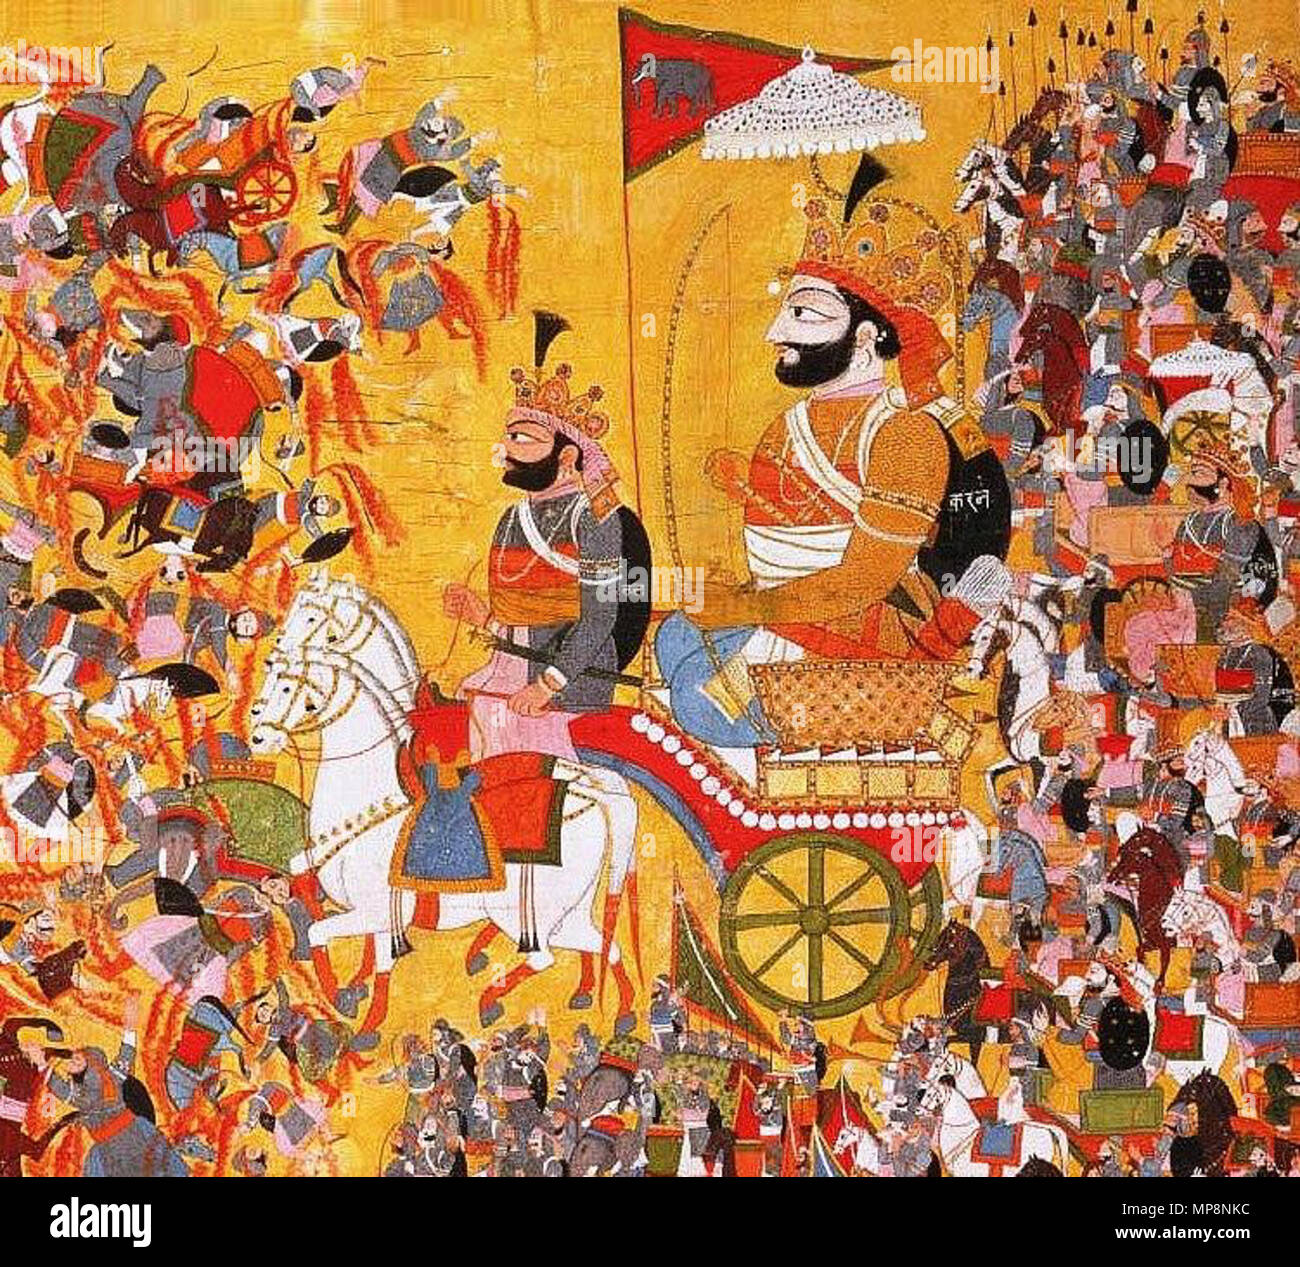 . English: The painting depicts the battle of Kurukshetra of the Mahabharata epic. Karna, commander of the Kaurava army is seen here. The painting is made in Himachal Pradesh or Jammu and Kashmir state of India and is opaque watercolor on cloth. 17 September 2011, 04:19 (UTC).  Arjuna and His Charioteer Krishna Confront Karna.jpg: Artist/maker unknown, India, Himachal Pradesh or Jammu and Kashmir derivative work: RajeshUnuppally 760 Karna in Kurukshetra Stock Photo